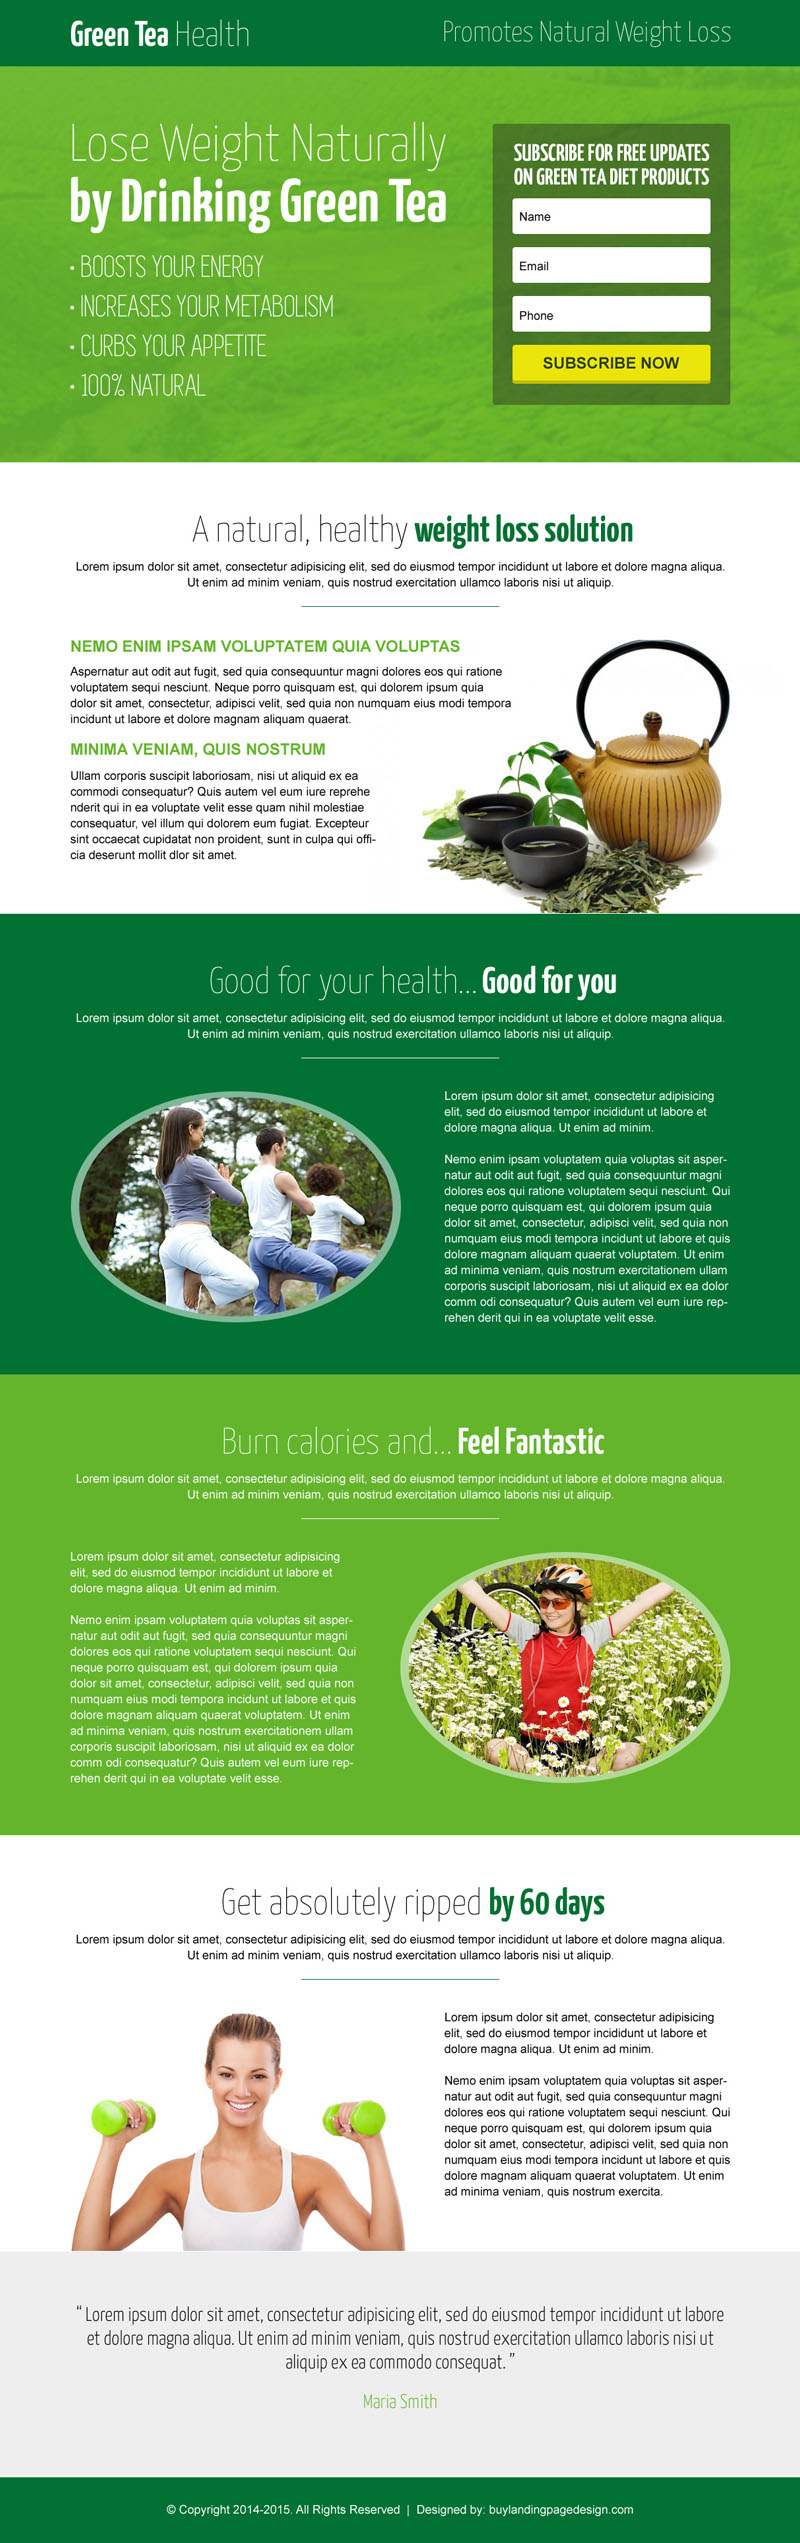 green-tea-natural-weight-loss-lead-capture-landing-page-design-templates-037